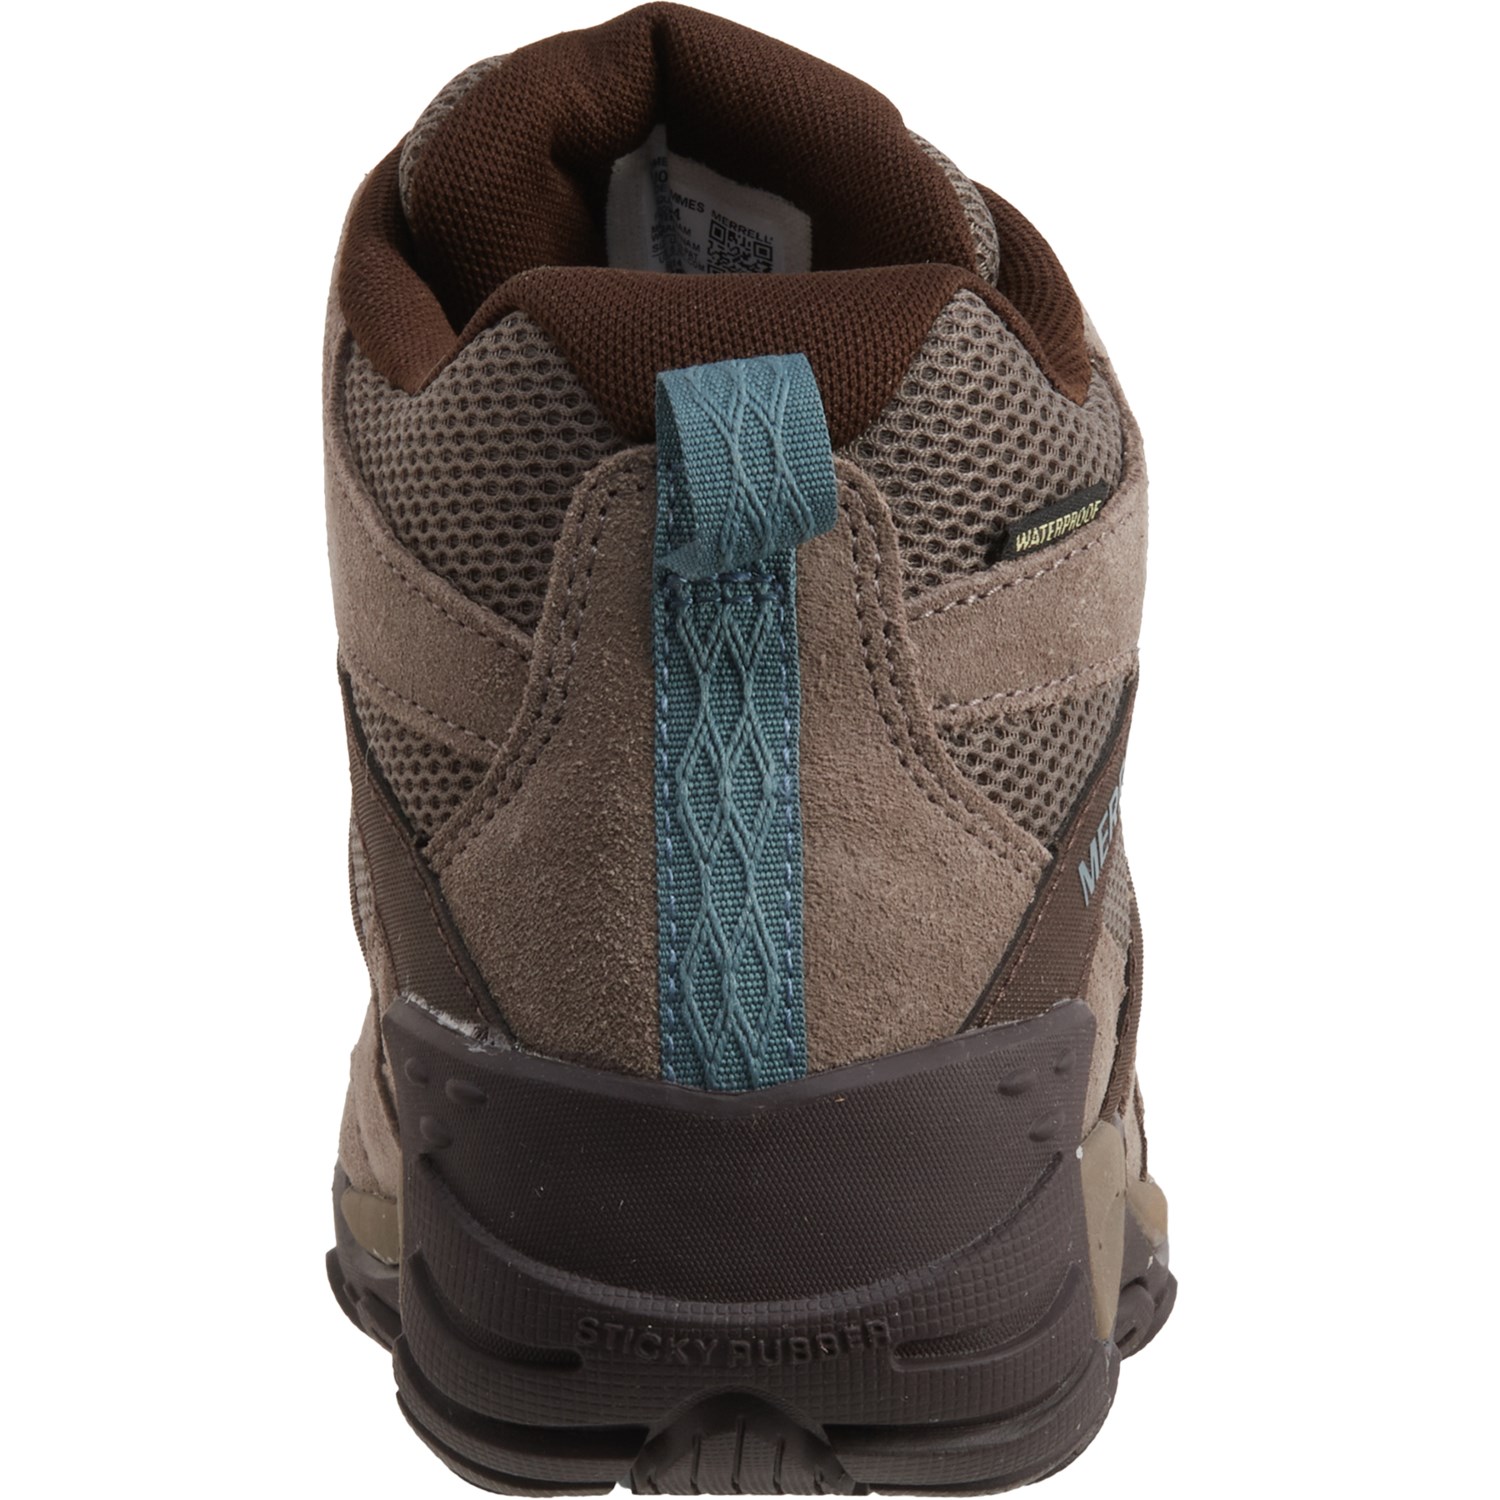 Merrell Deverta 2 Mid Hiking Boots (For Women) - Save 51%